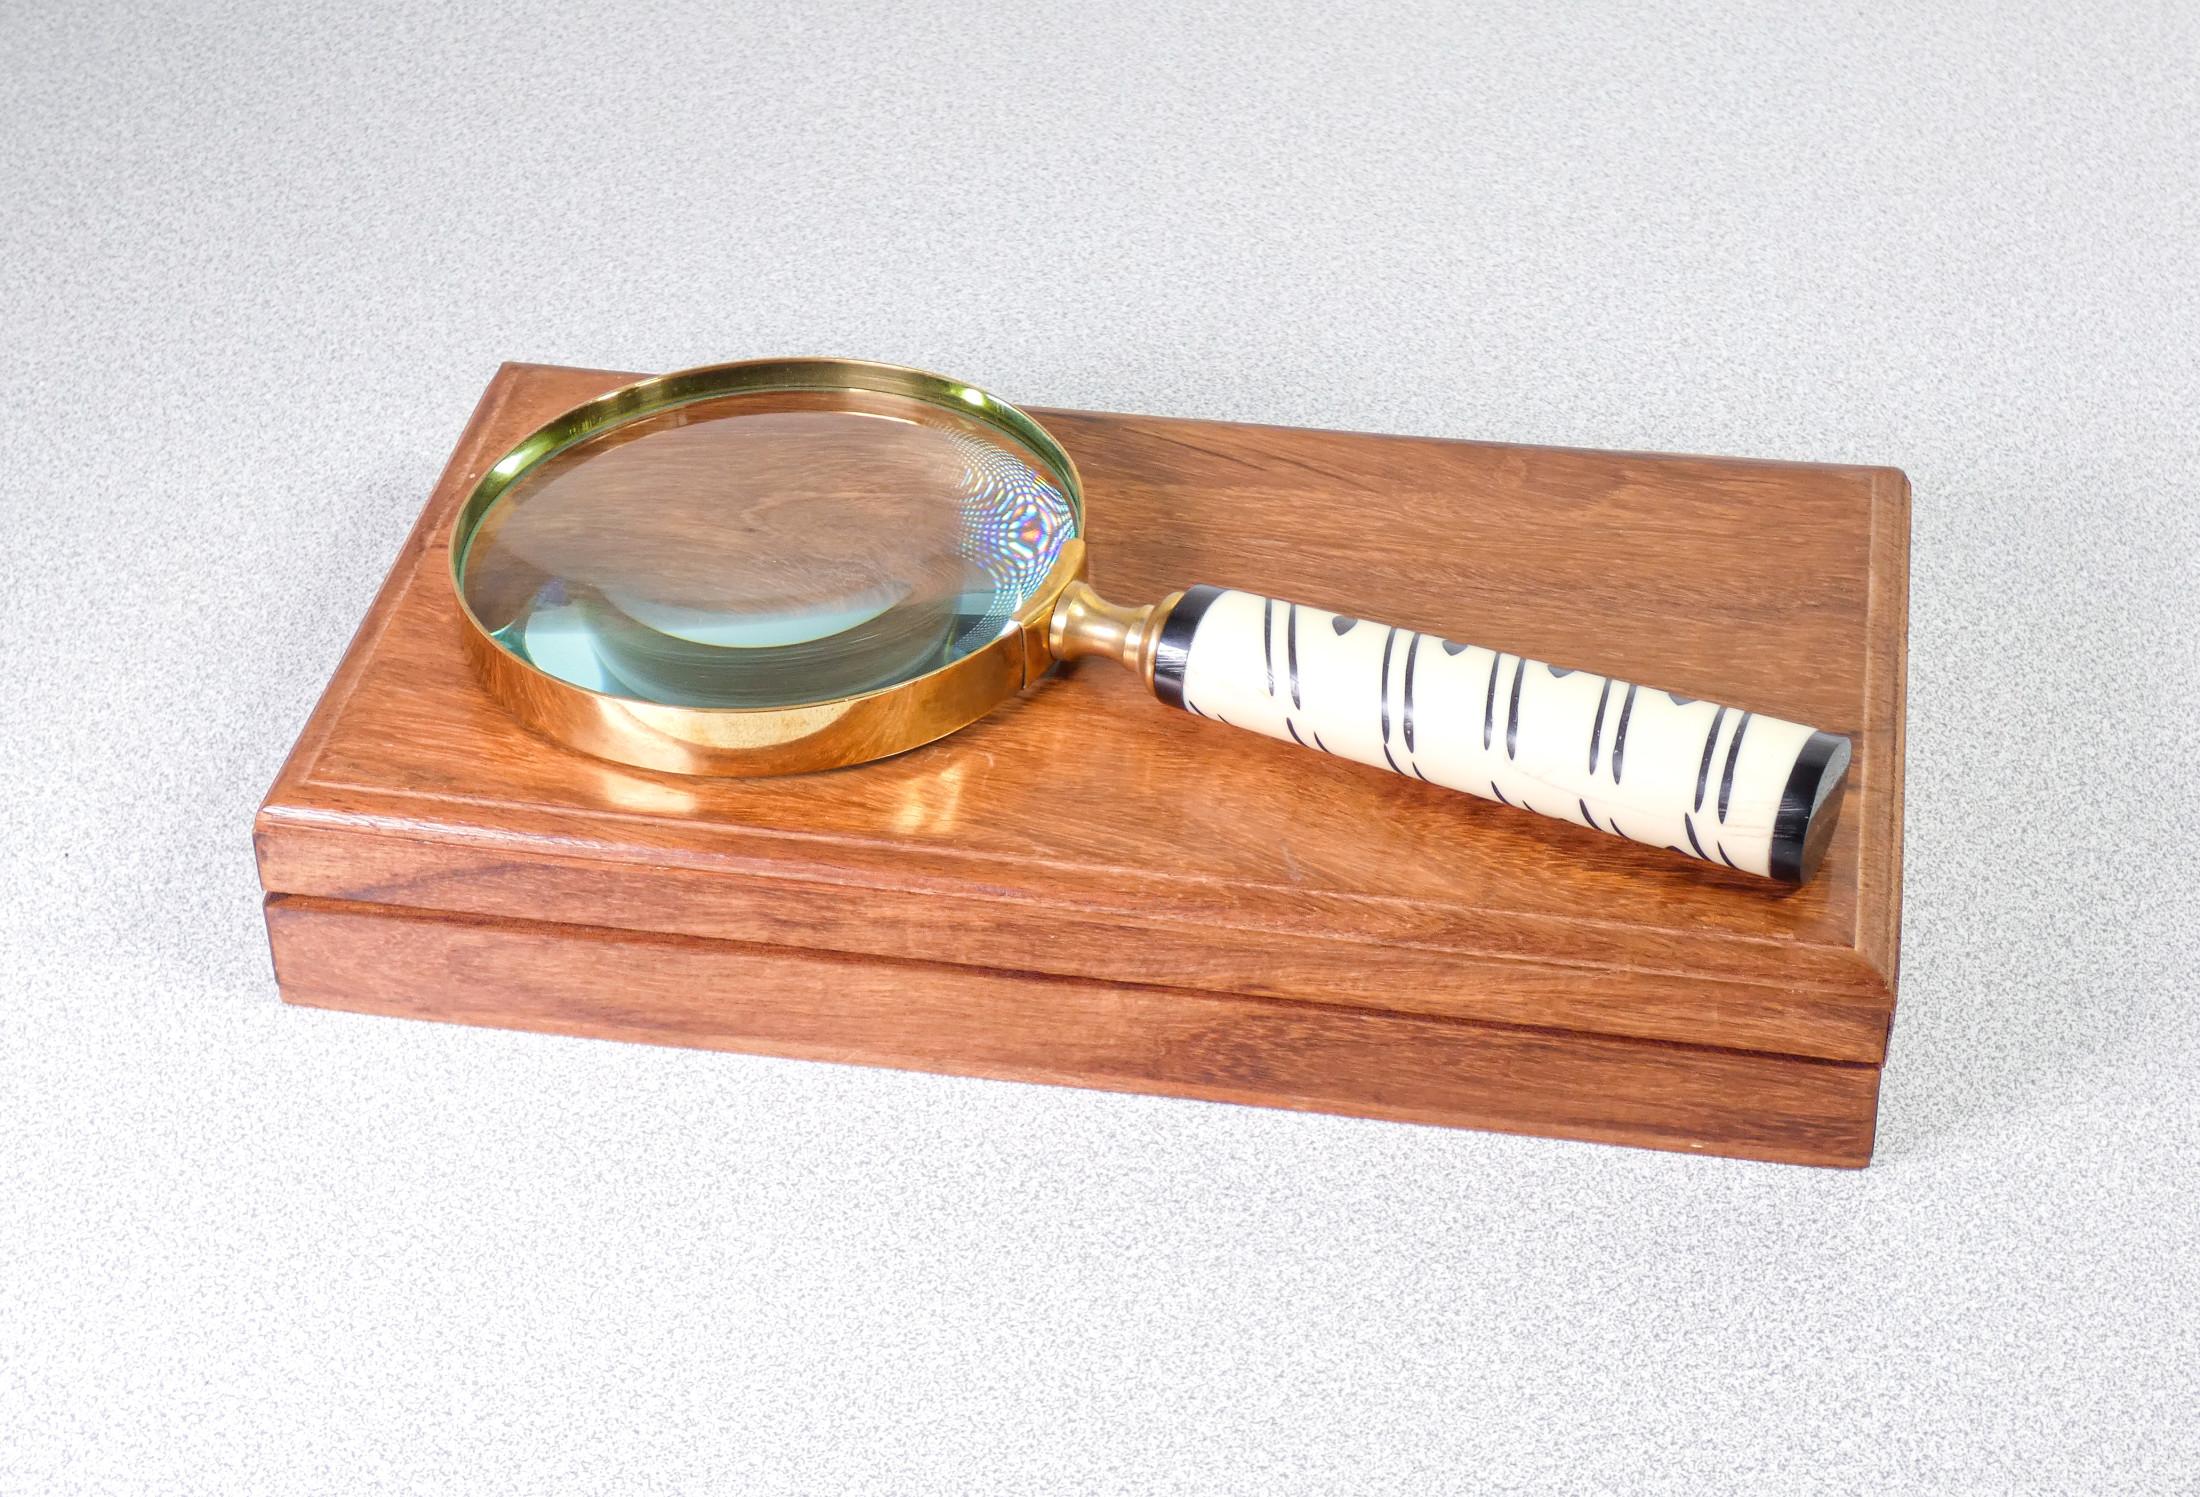 Table magnifier, with bone handle, case in
wood

ORIGIN
Italy

TEMPLATE
Table magnifying lens

MATERIALS
Bone handle, lens, wood

DIMENSIONS
Custody
24.5 x 13 x H 4 cm

CONDITIONS
Excellent. Evaluate through the attached photos.